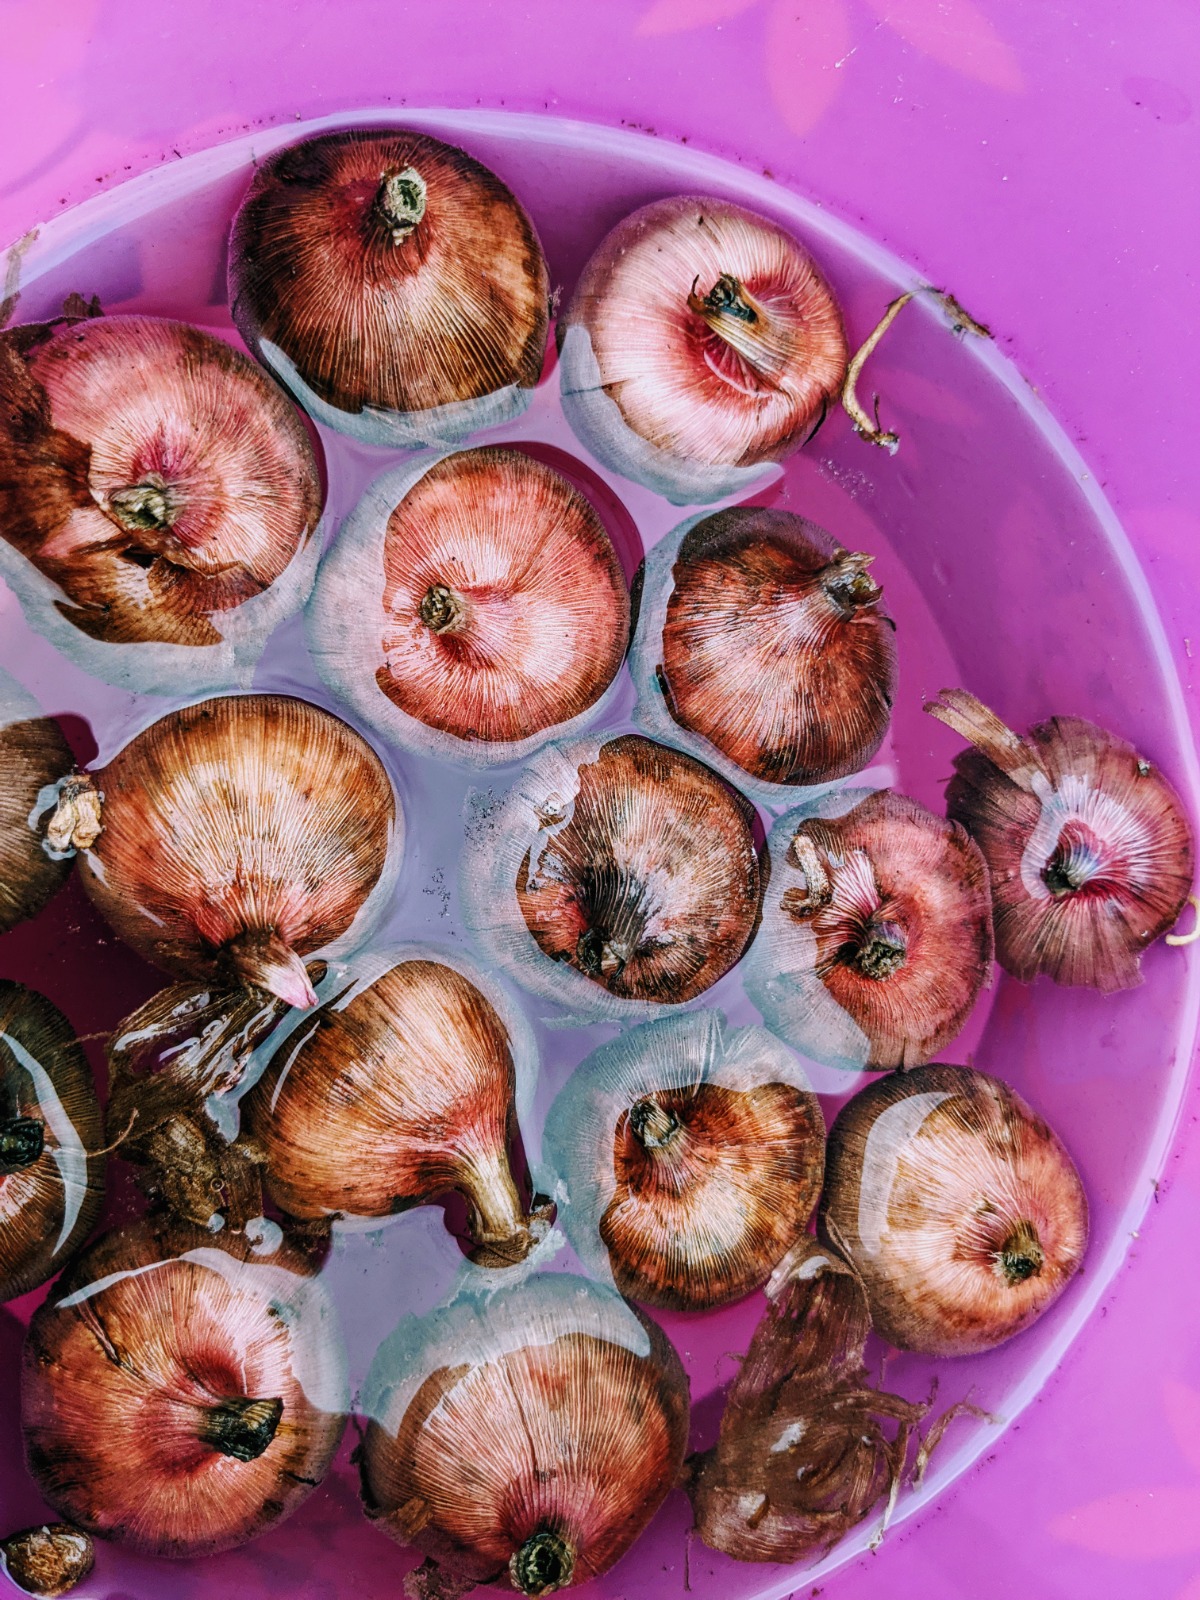 Soaking Gladiolus Corms in a purple bucket